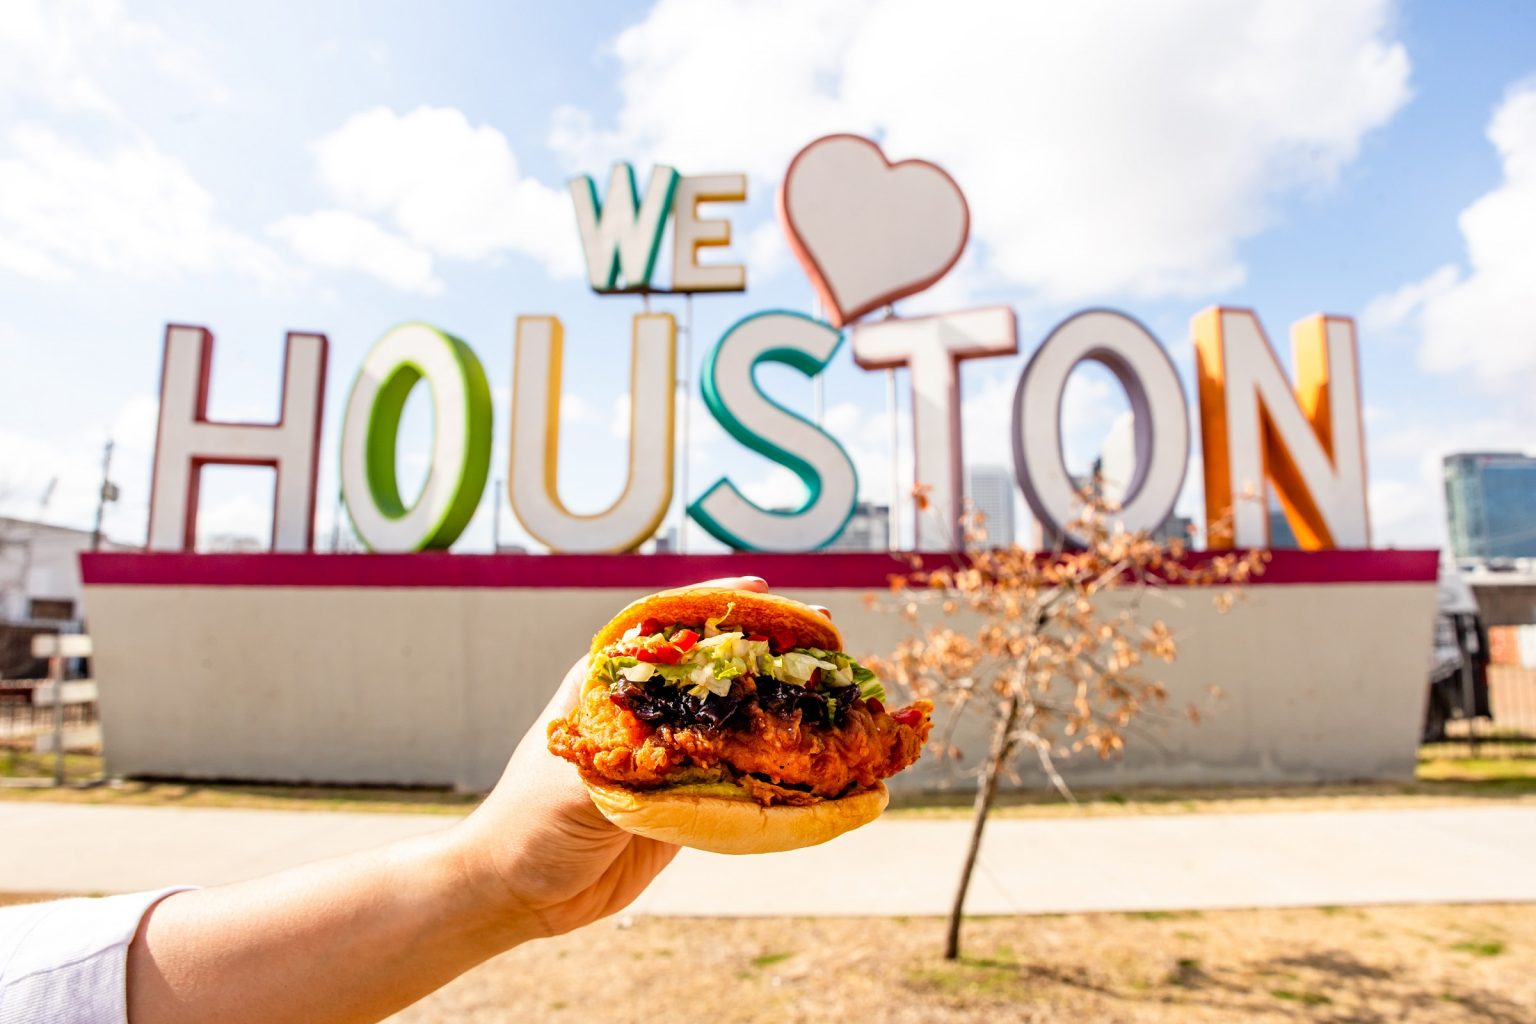 hand holding sandwich in front of We Heart Houston sign